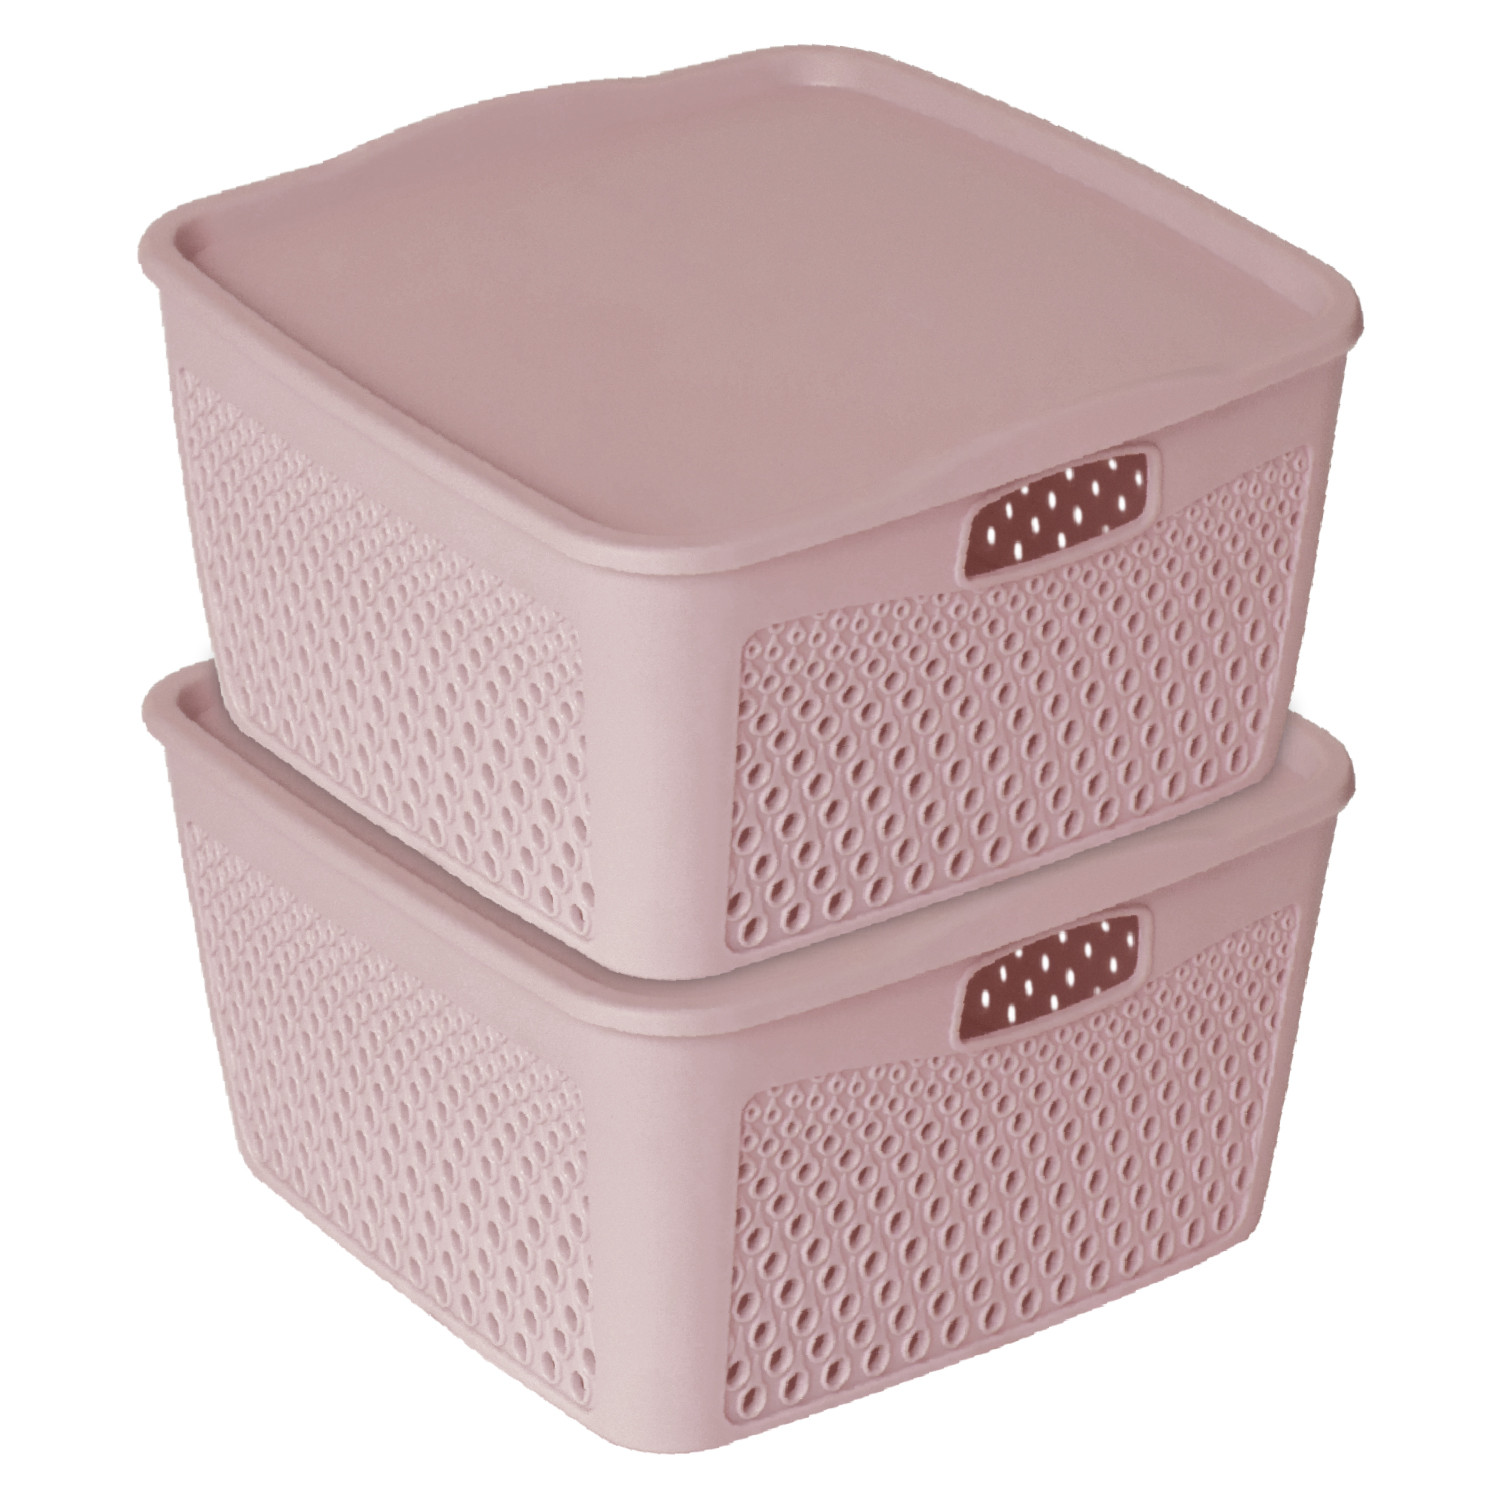 Kuber Industries Netted Design Unbreakable Multipurpose Square Shape Plastic Storage Baskets with lid Small (Grey)